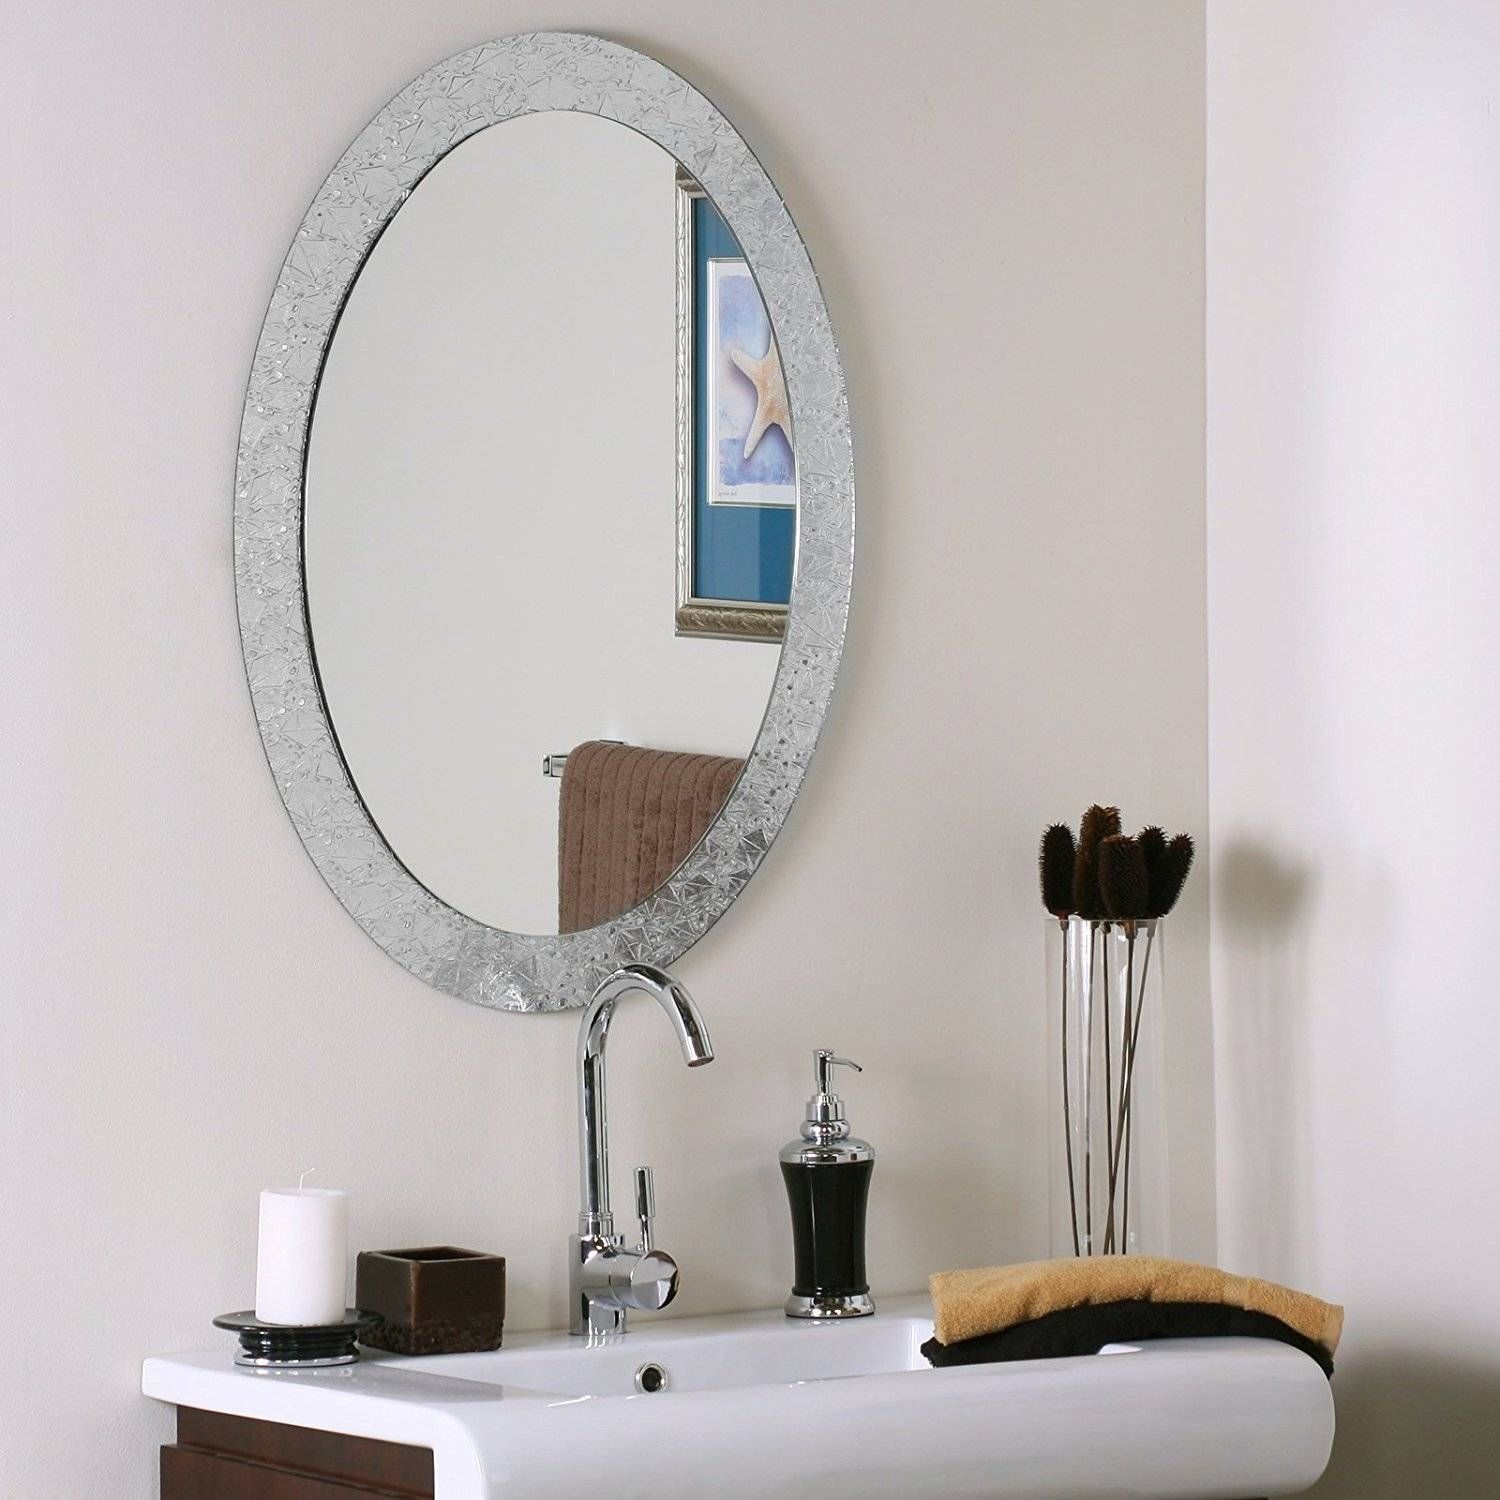 Bathroom Cabinets : Small Wall Mirrors Silver Wall Mirror Big Wall With Regard To Small Bevelled Mirrors (View 9 of 15)